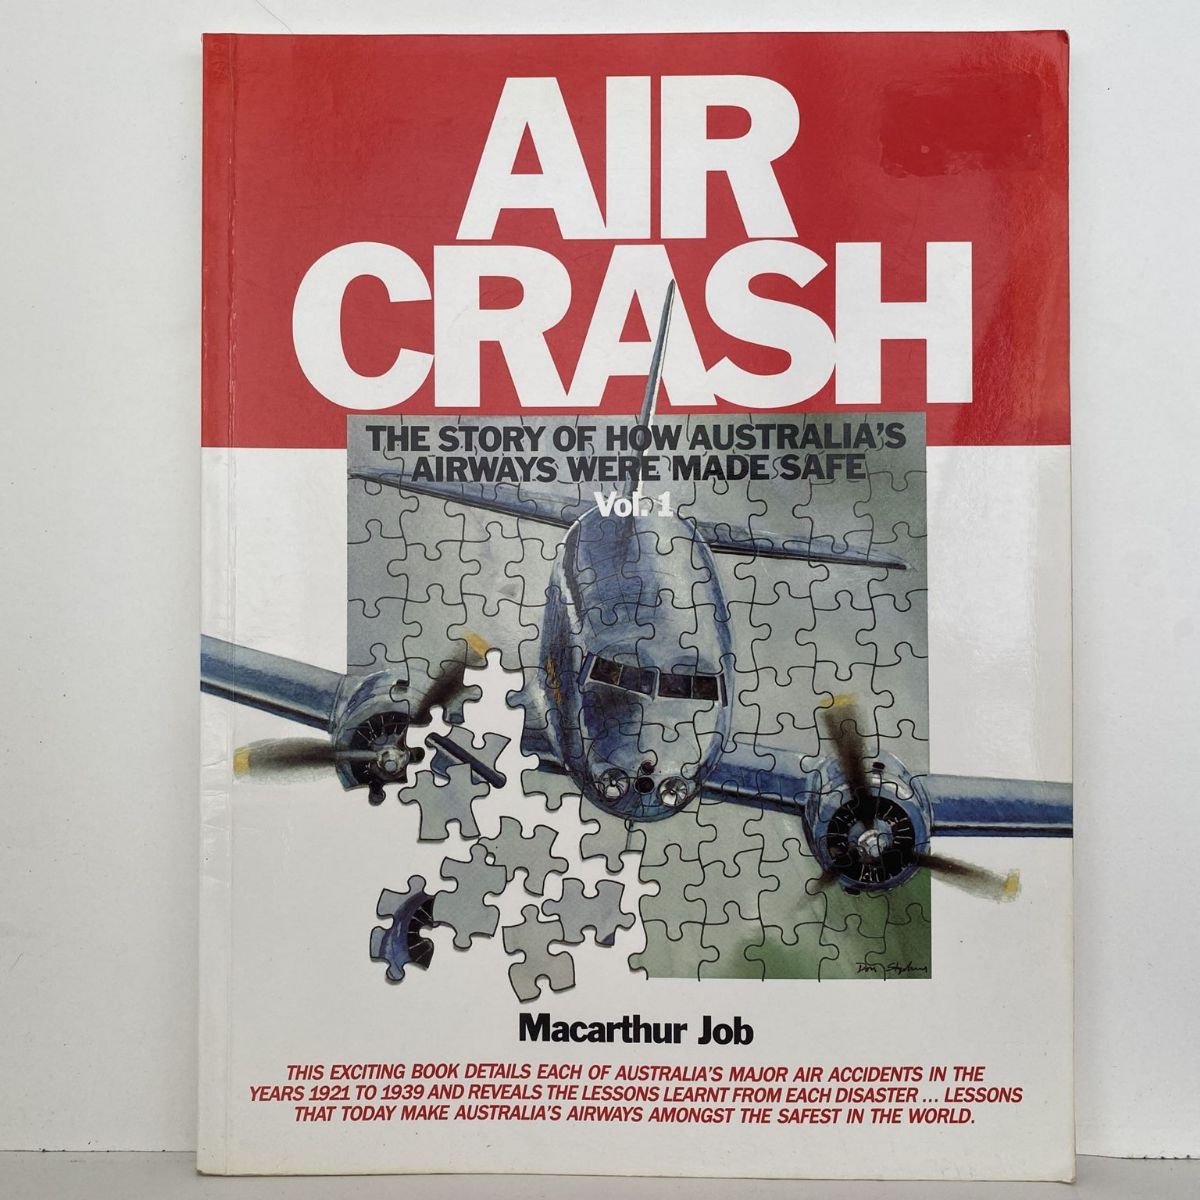 AIR CRASH: The Story of How Australia's Airways Were Made Safe. Vol 1 1921-39